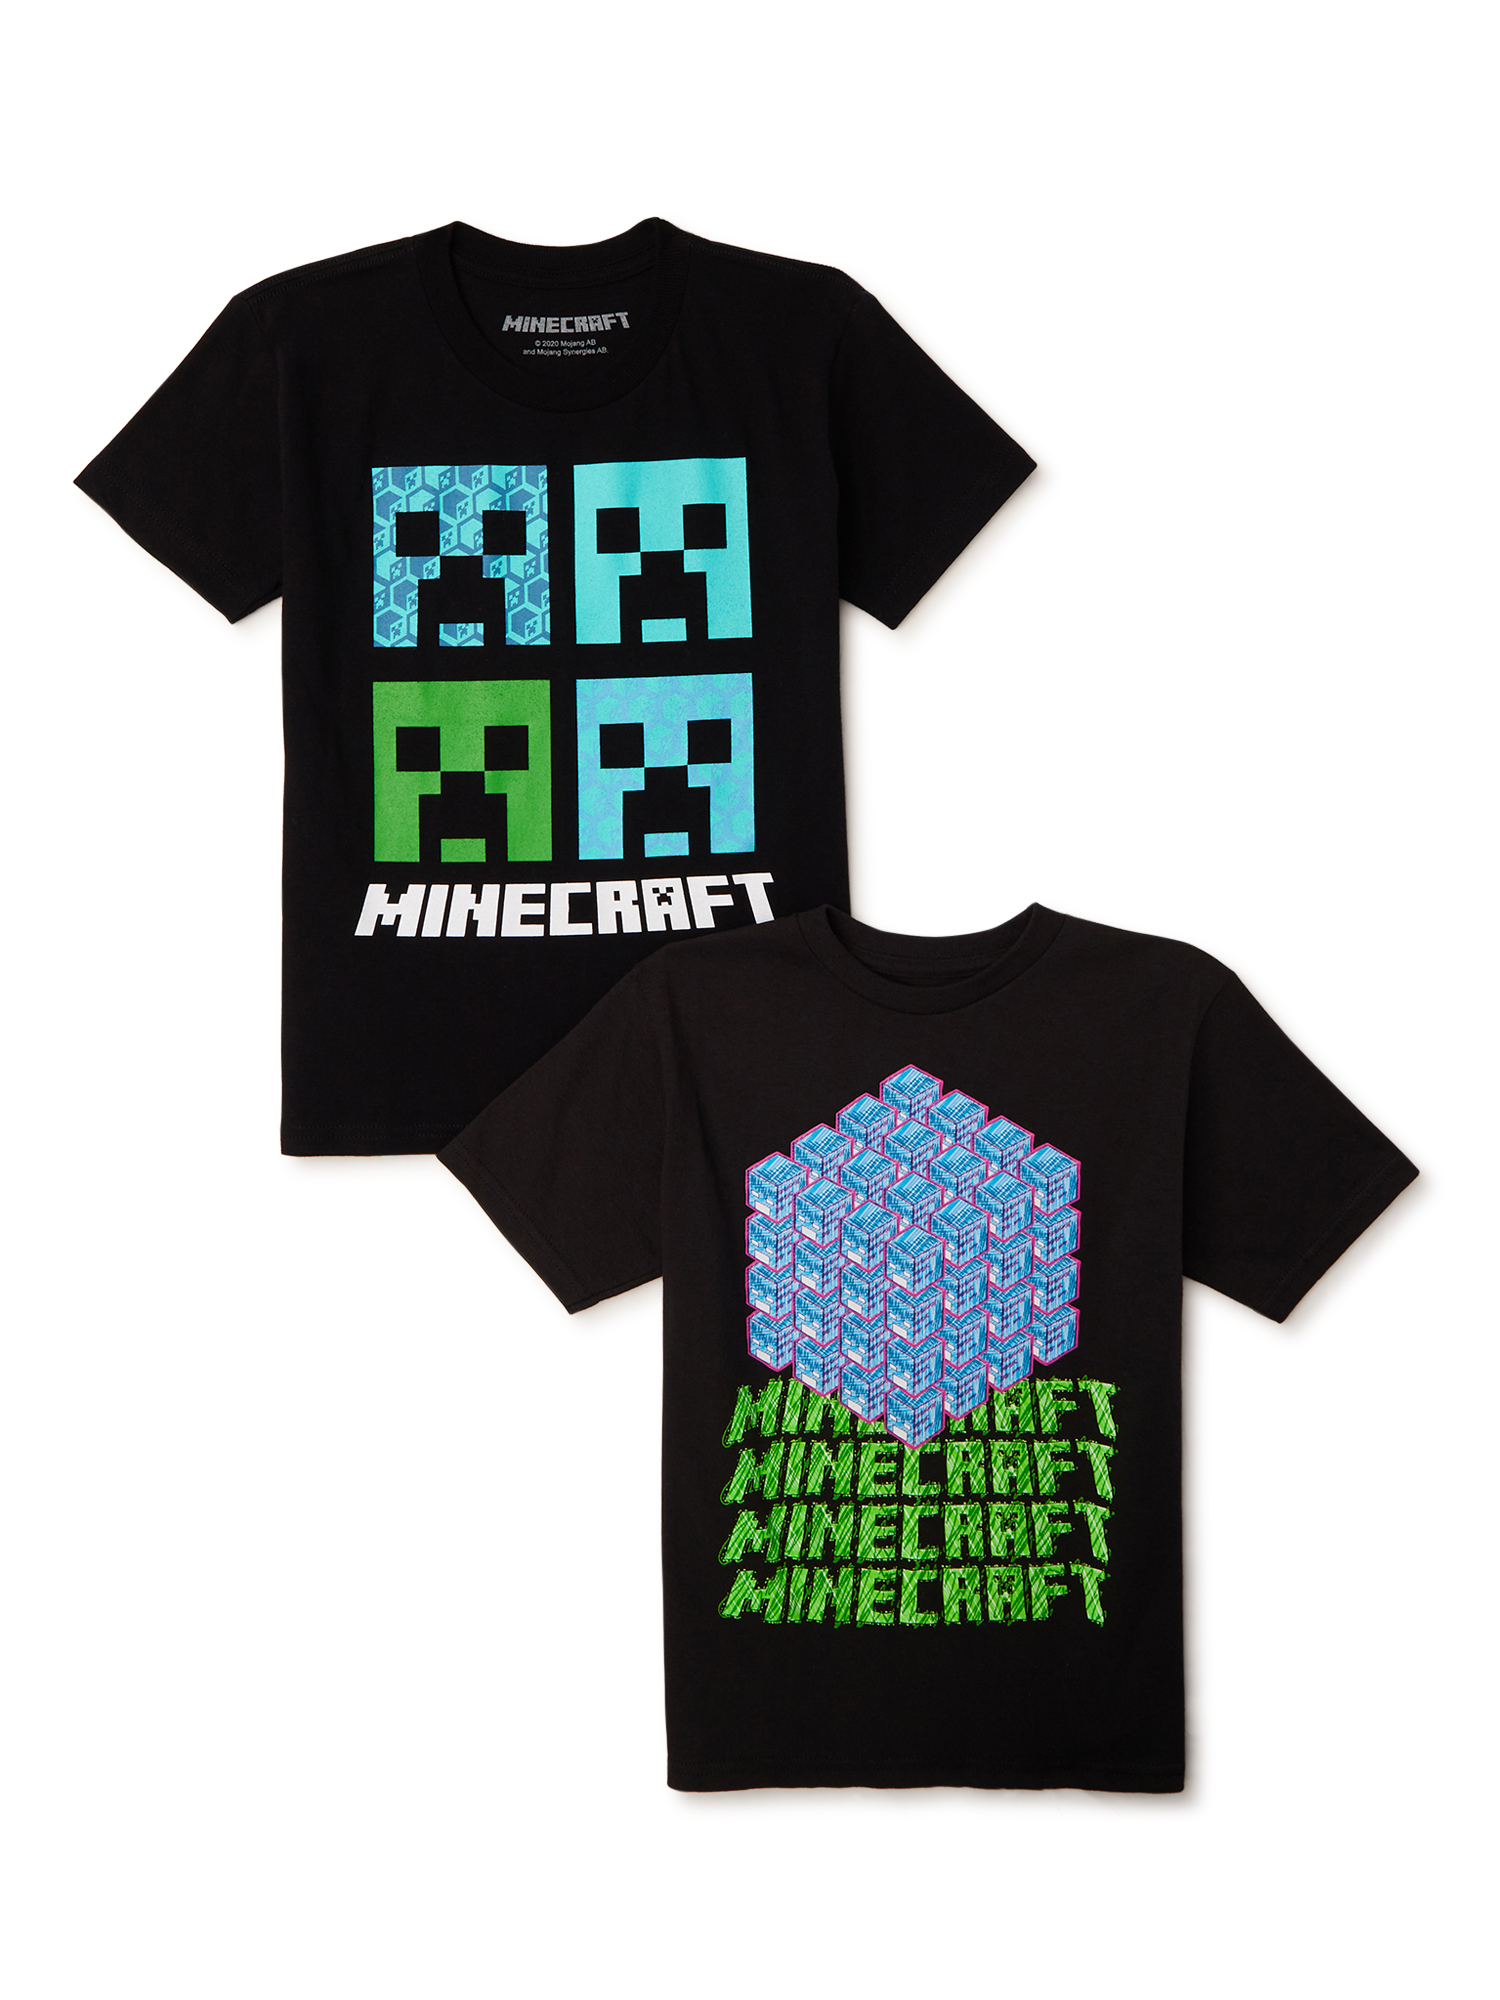 Minecraft Boys Graphic T-Shirt, 2-Pack, Sizes 4-18 - image 1 of 3